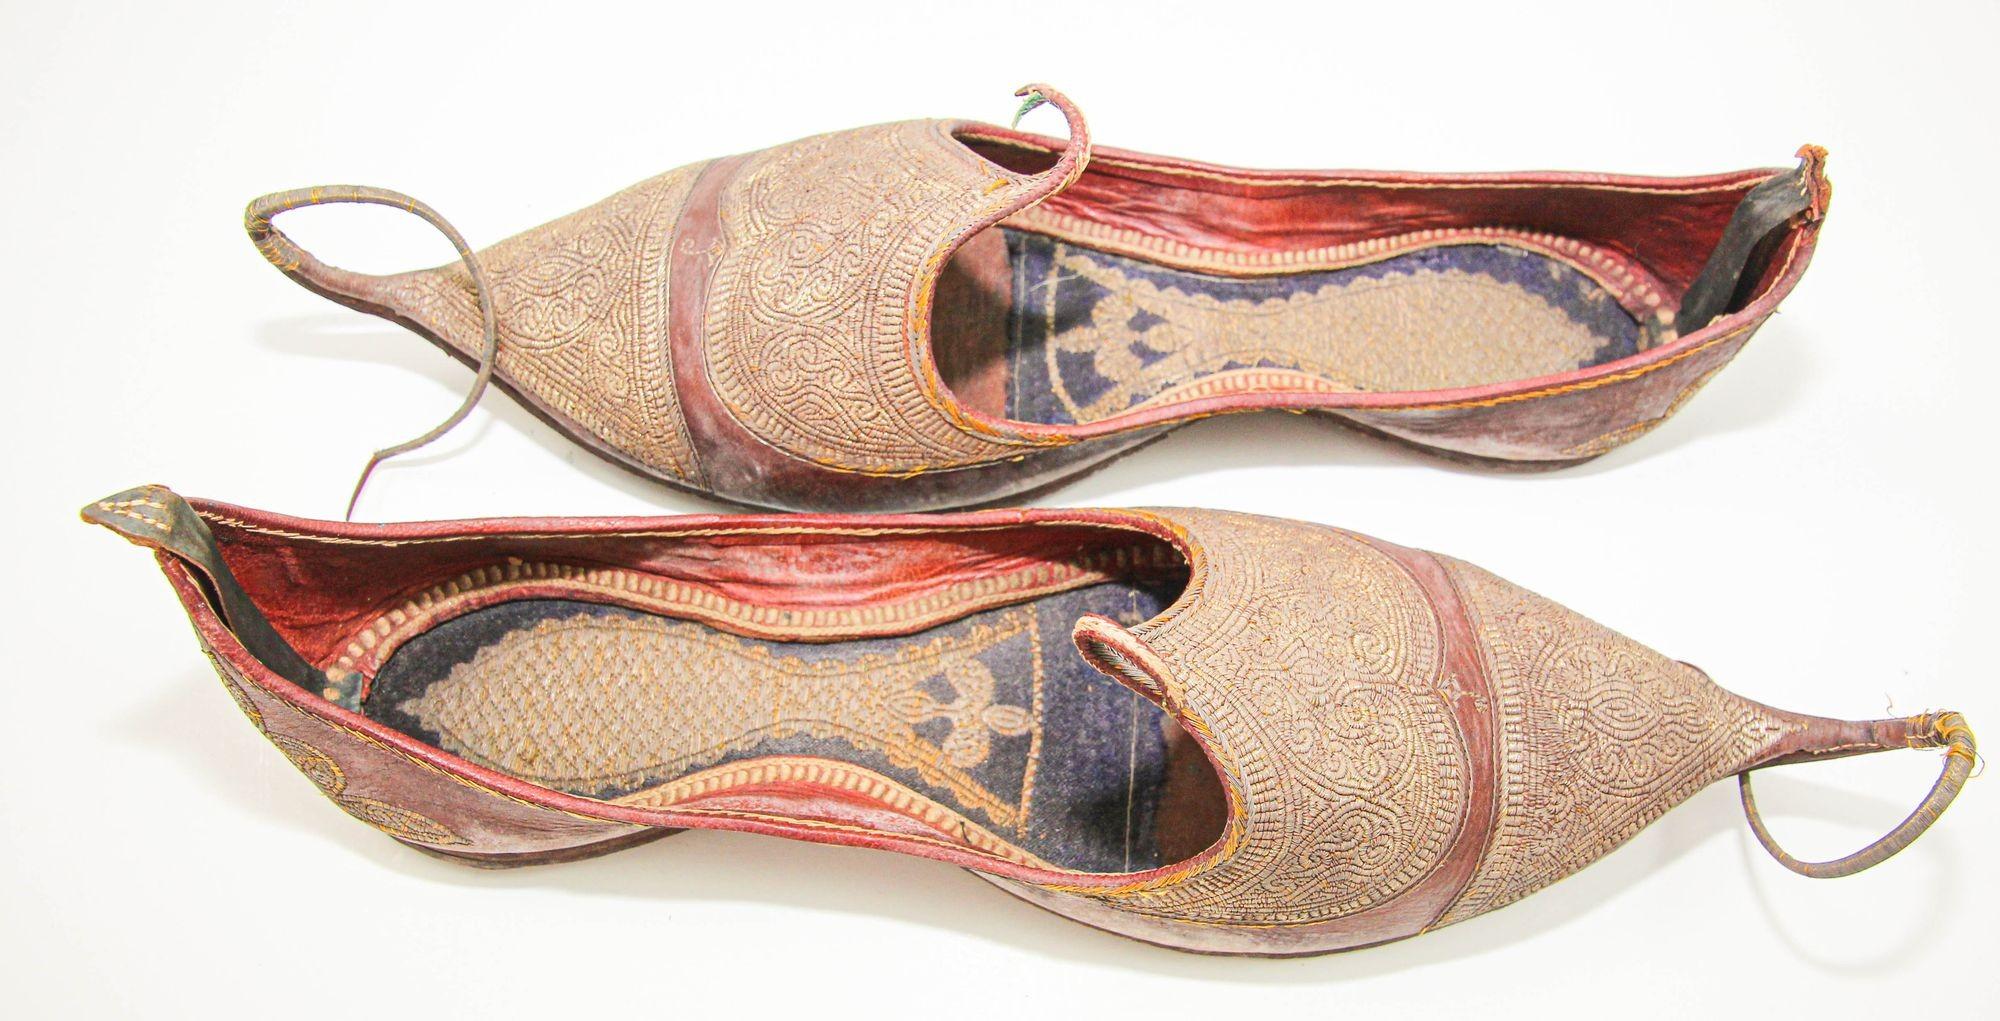 Islamic Antique Leather Mughal Raj Ottoman Moorish Shoes Gold Embroidered For Sale